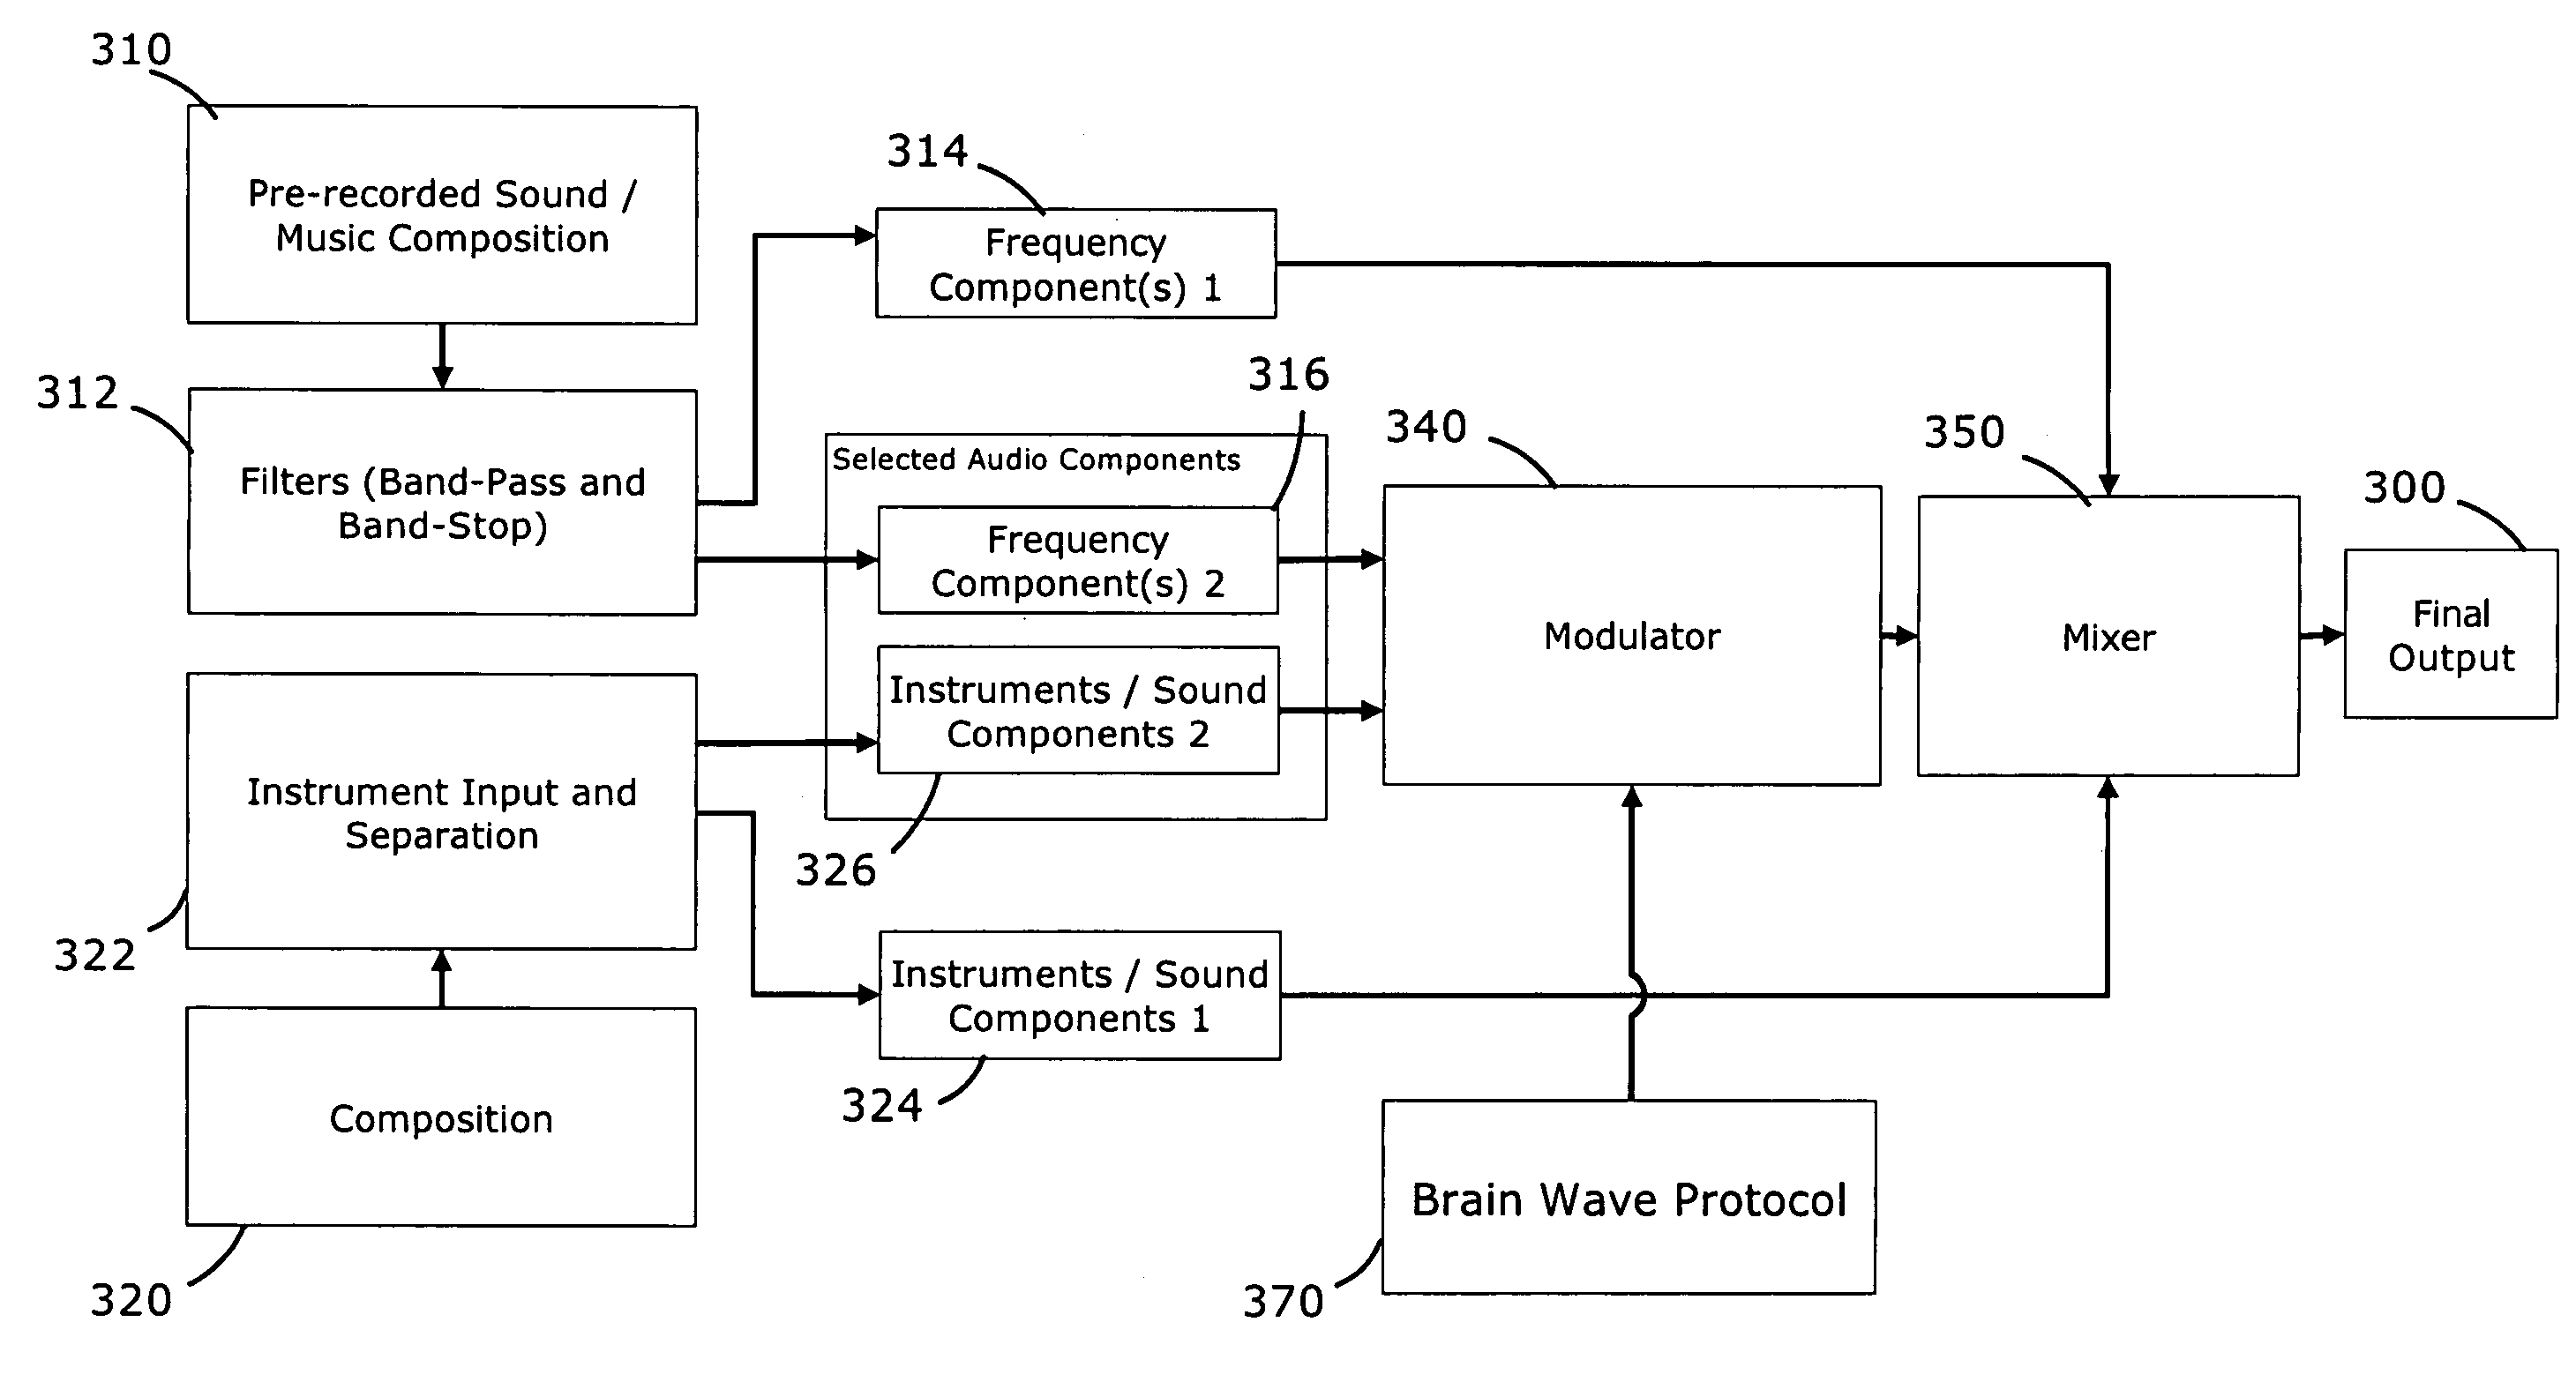 Method for incorporating brain wave entrainment into sound production